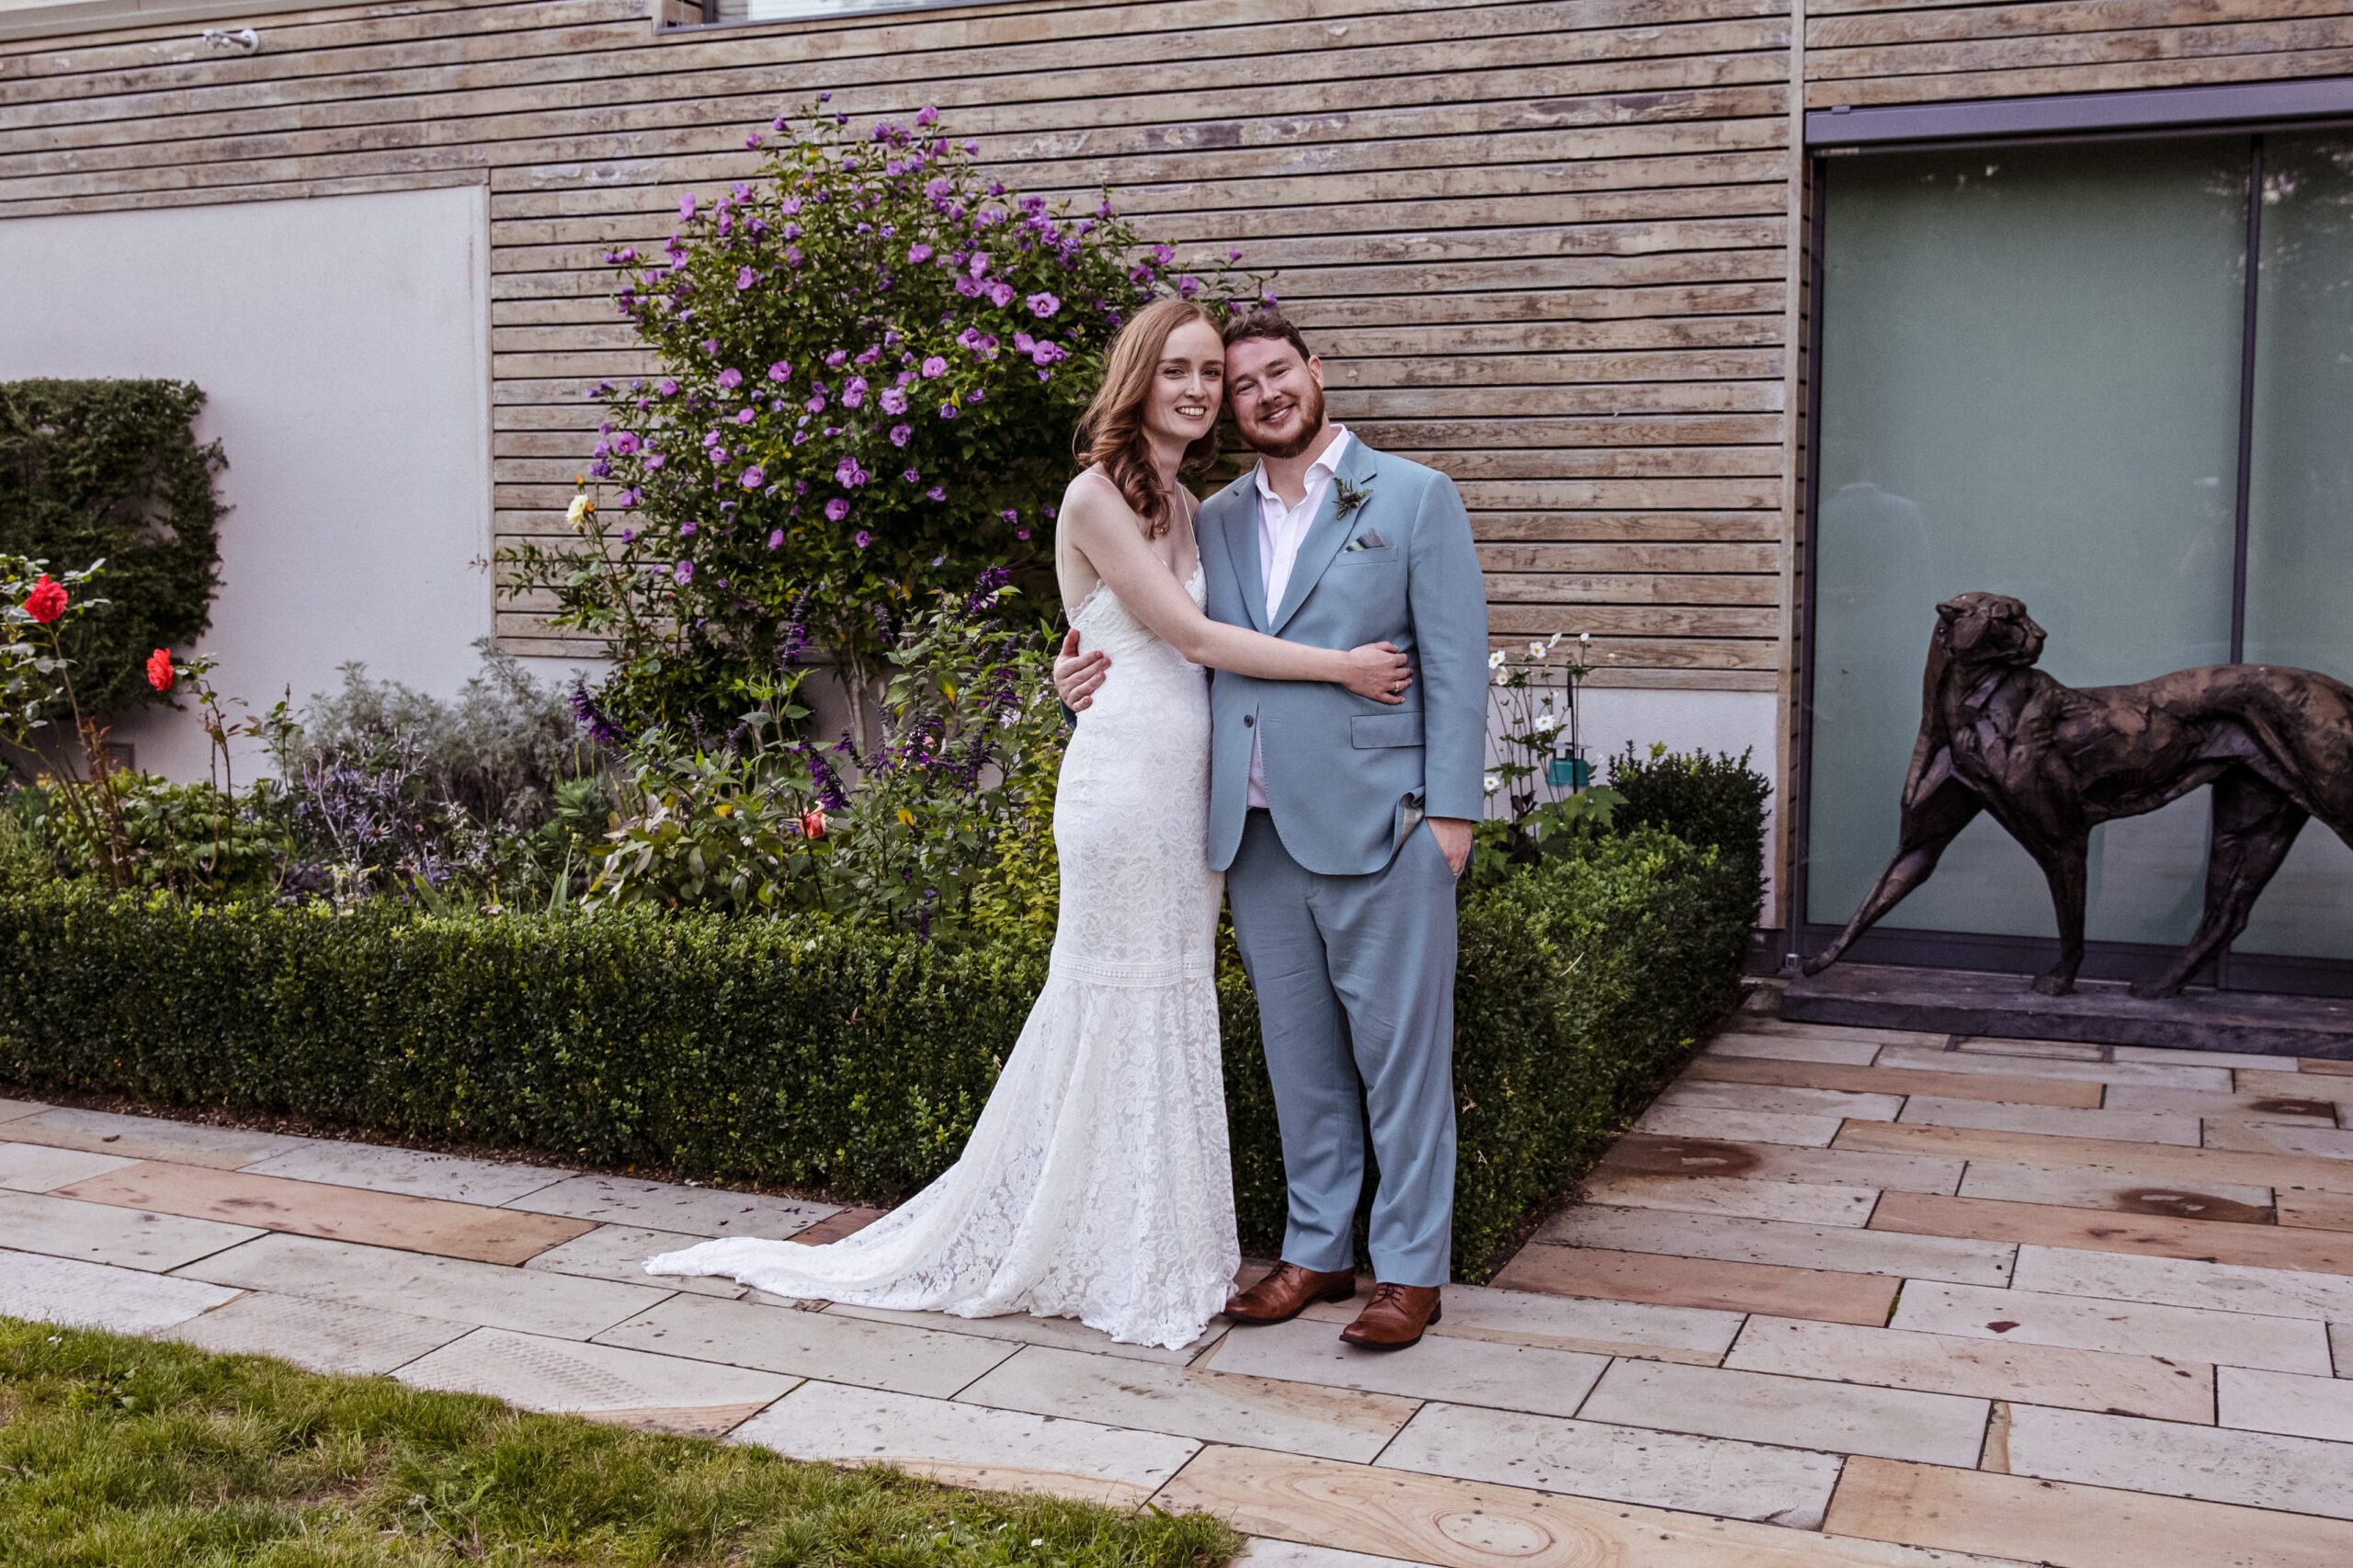 the bride and groom pose for picture in their garden with sculpture in background